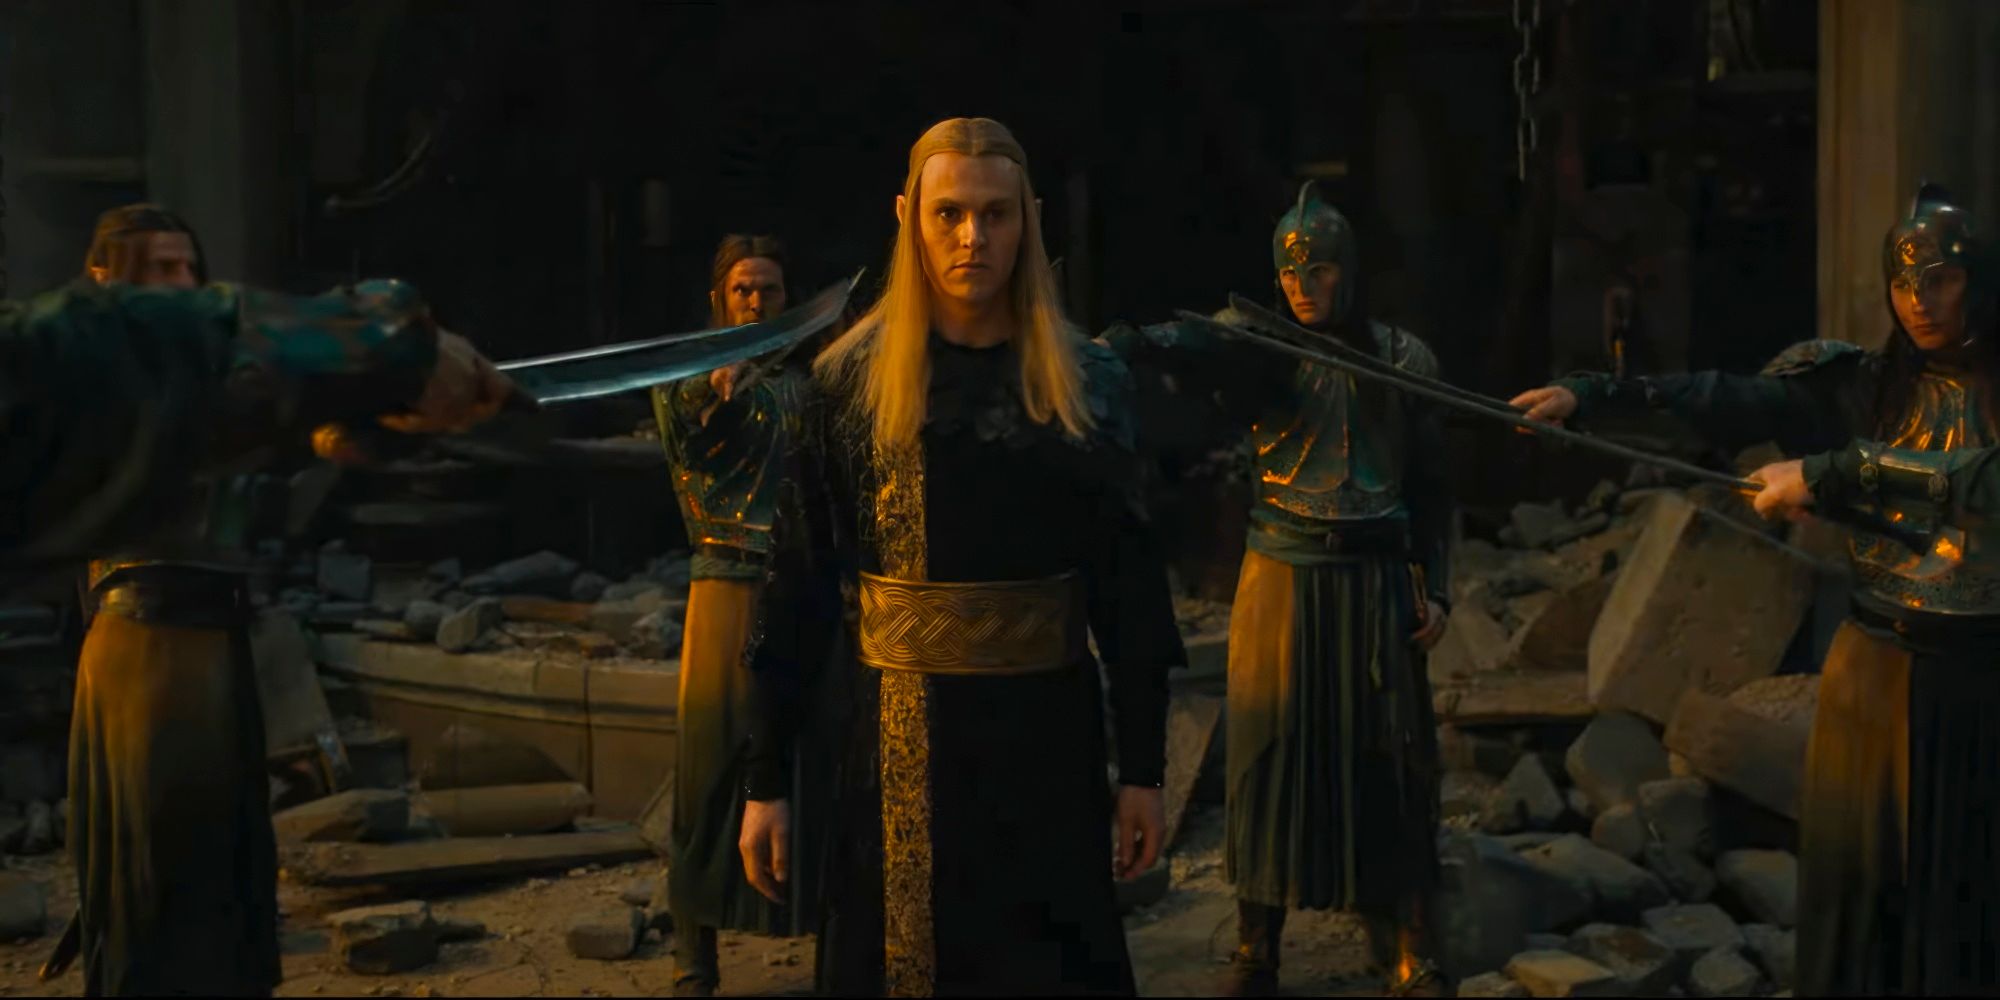  In his Annatar form, Sauron is seen smirking while surrounded by guards in The Lord of the Rings: The Rings of Power season 2